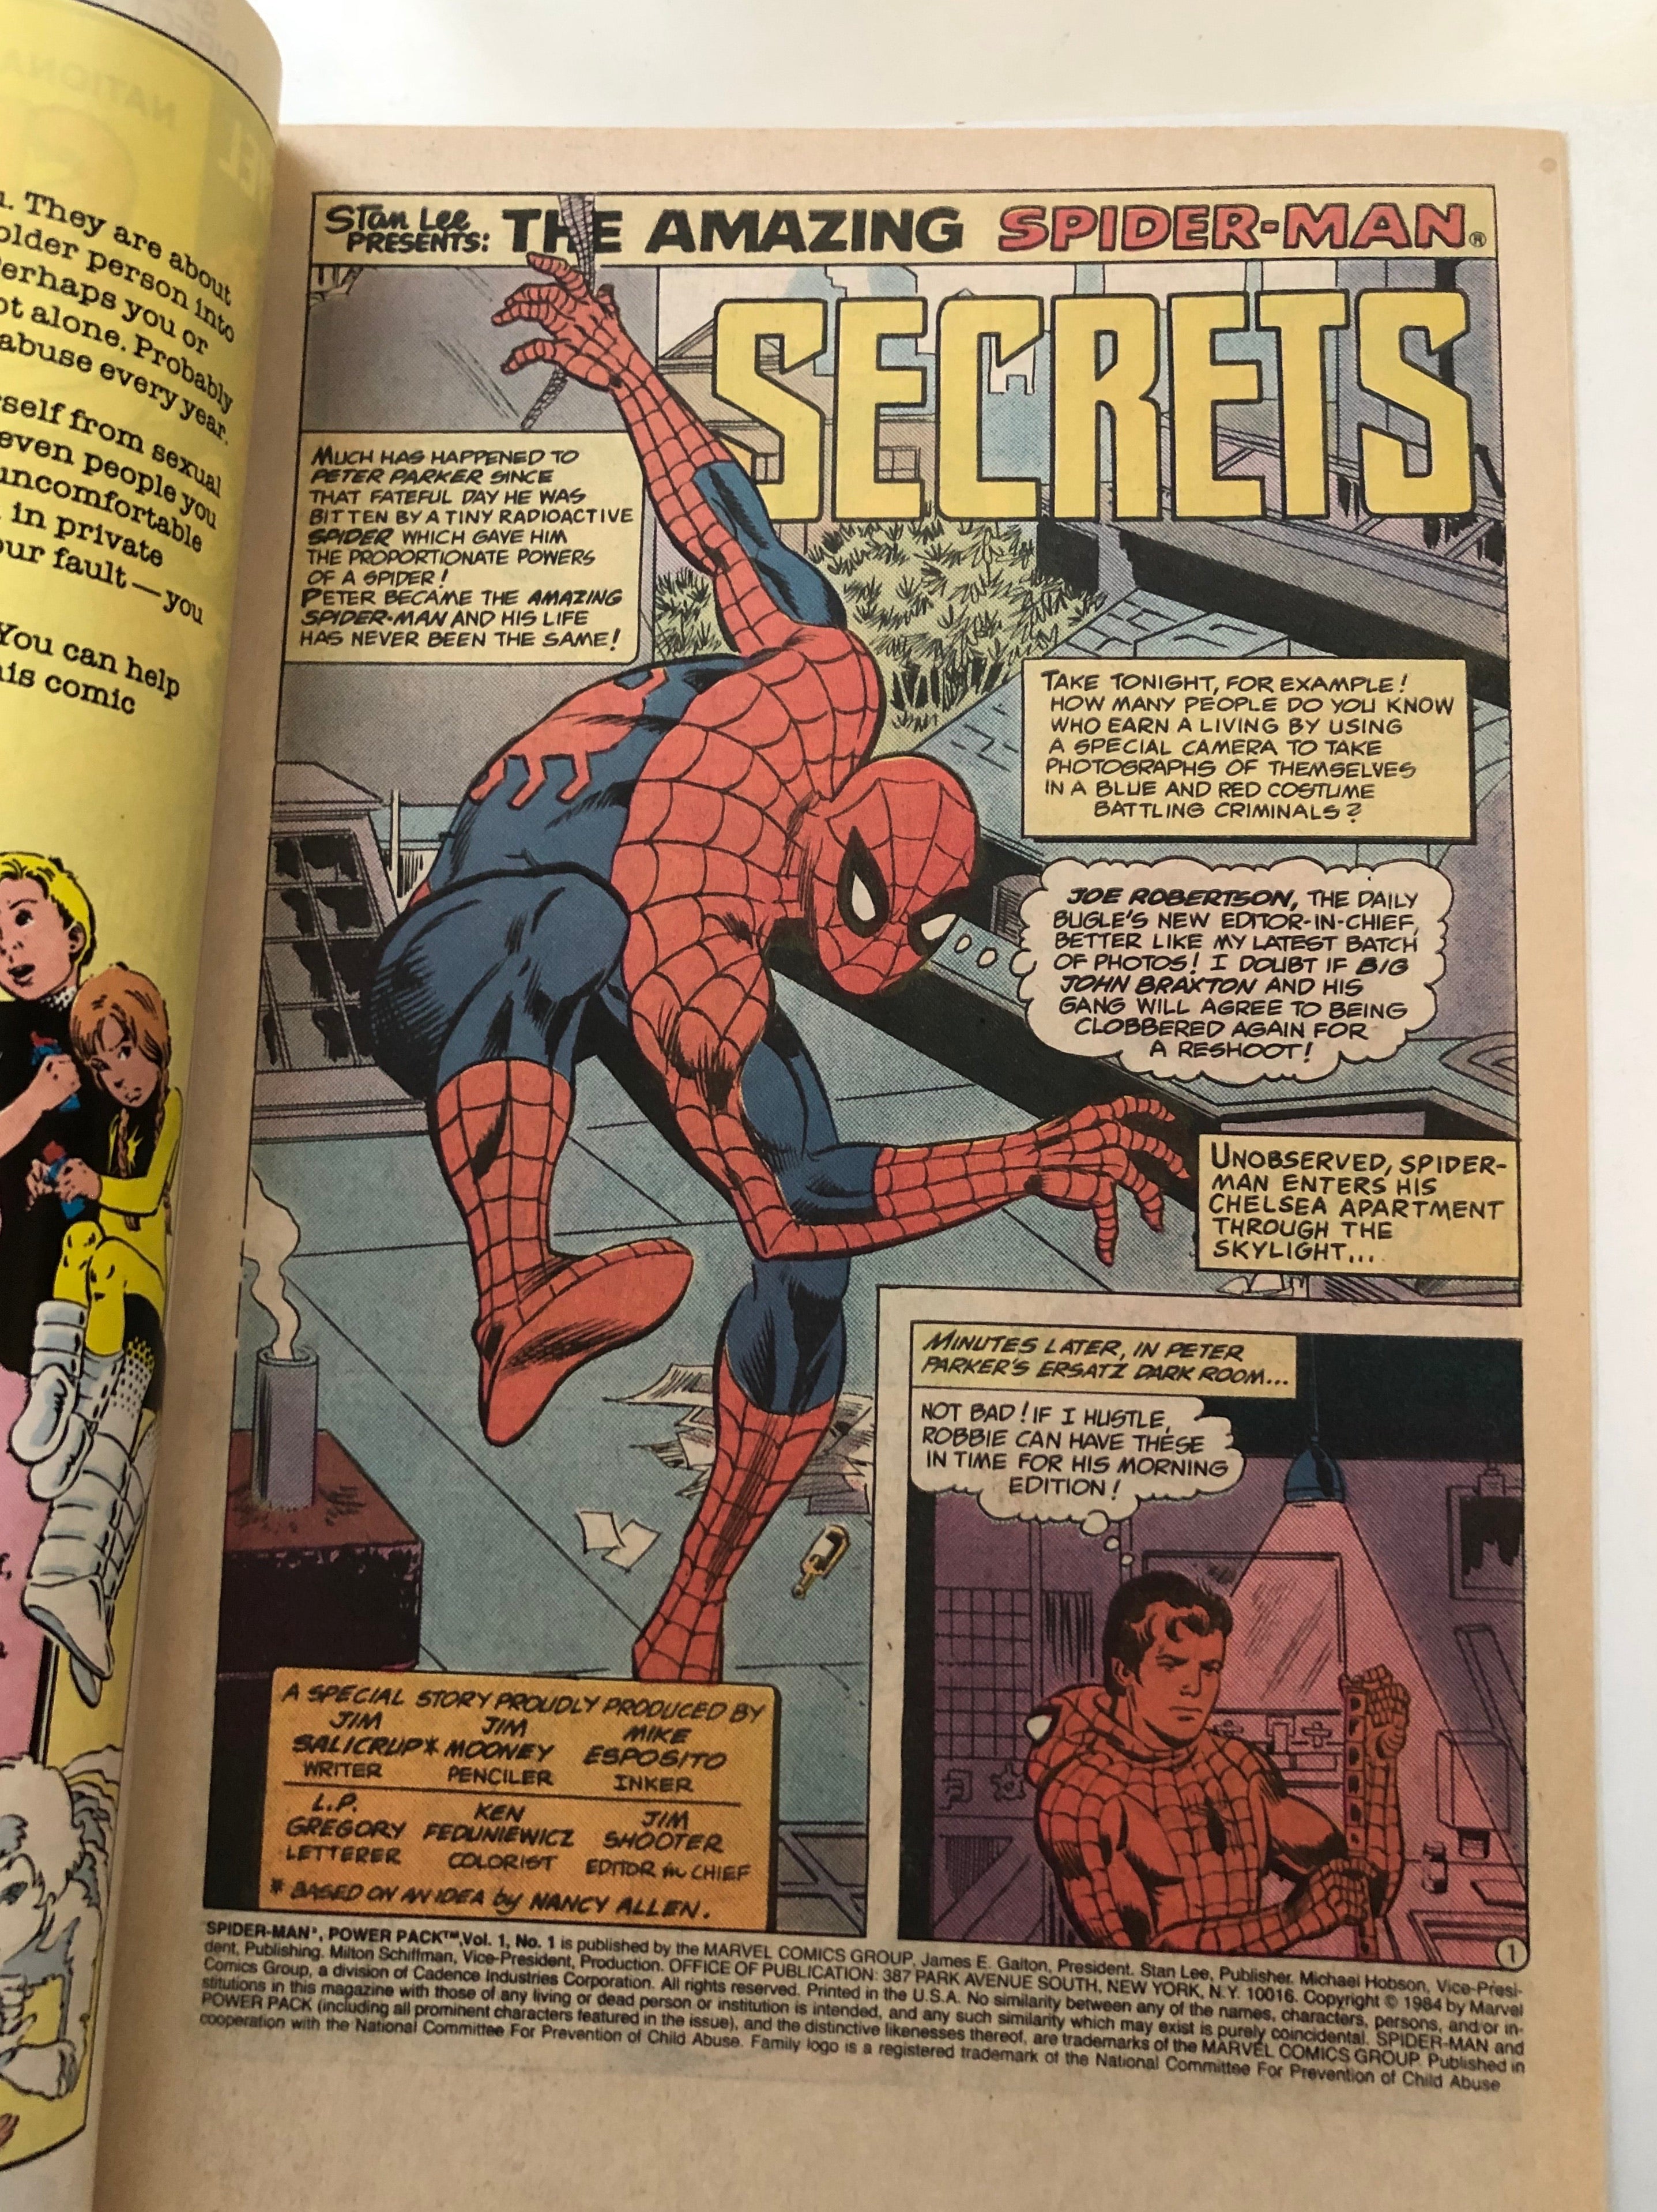 Spider-Man and Power Pack special issue comic book 1984